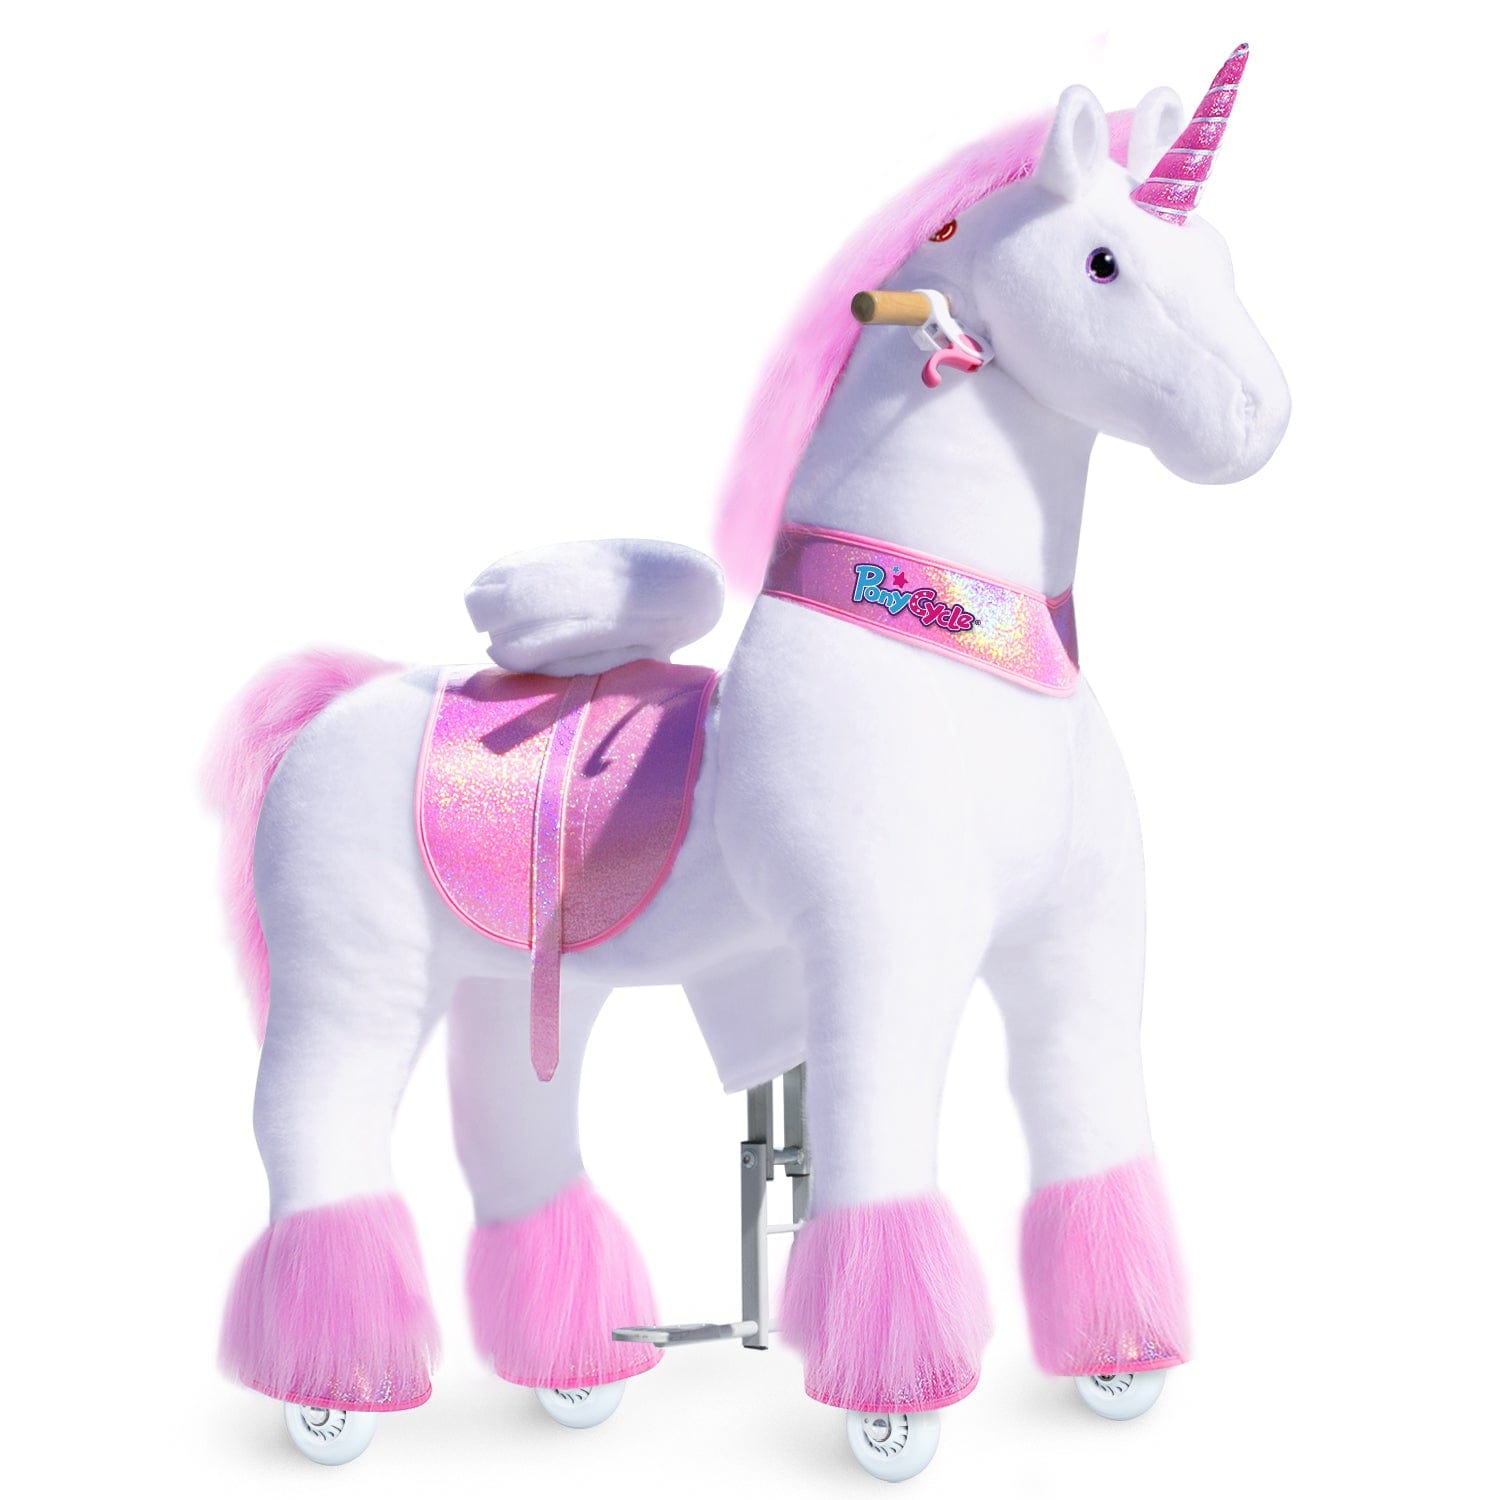 PonyCycle, Inc. ride on toy Pink / Size 5 for Age 7+ Ride on Unicorn